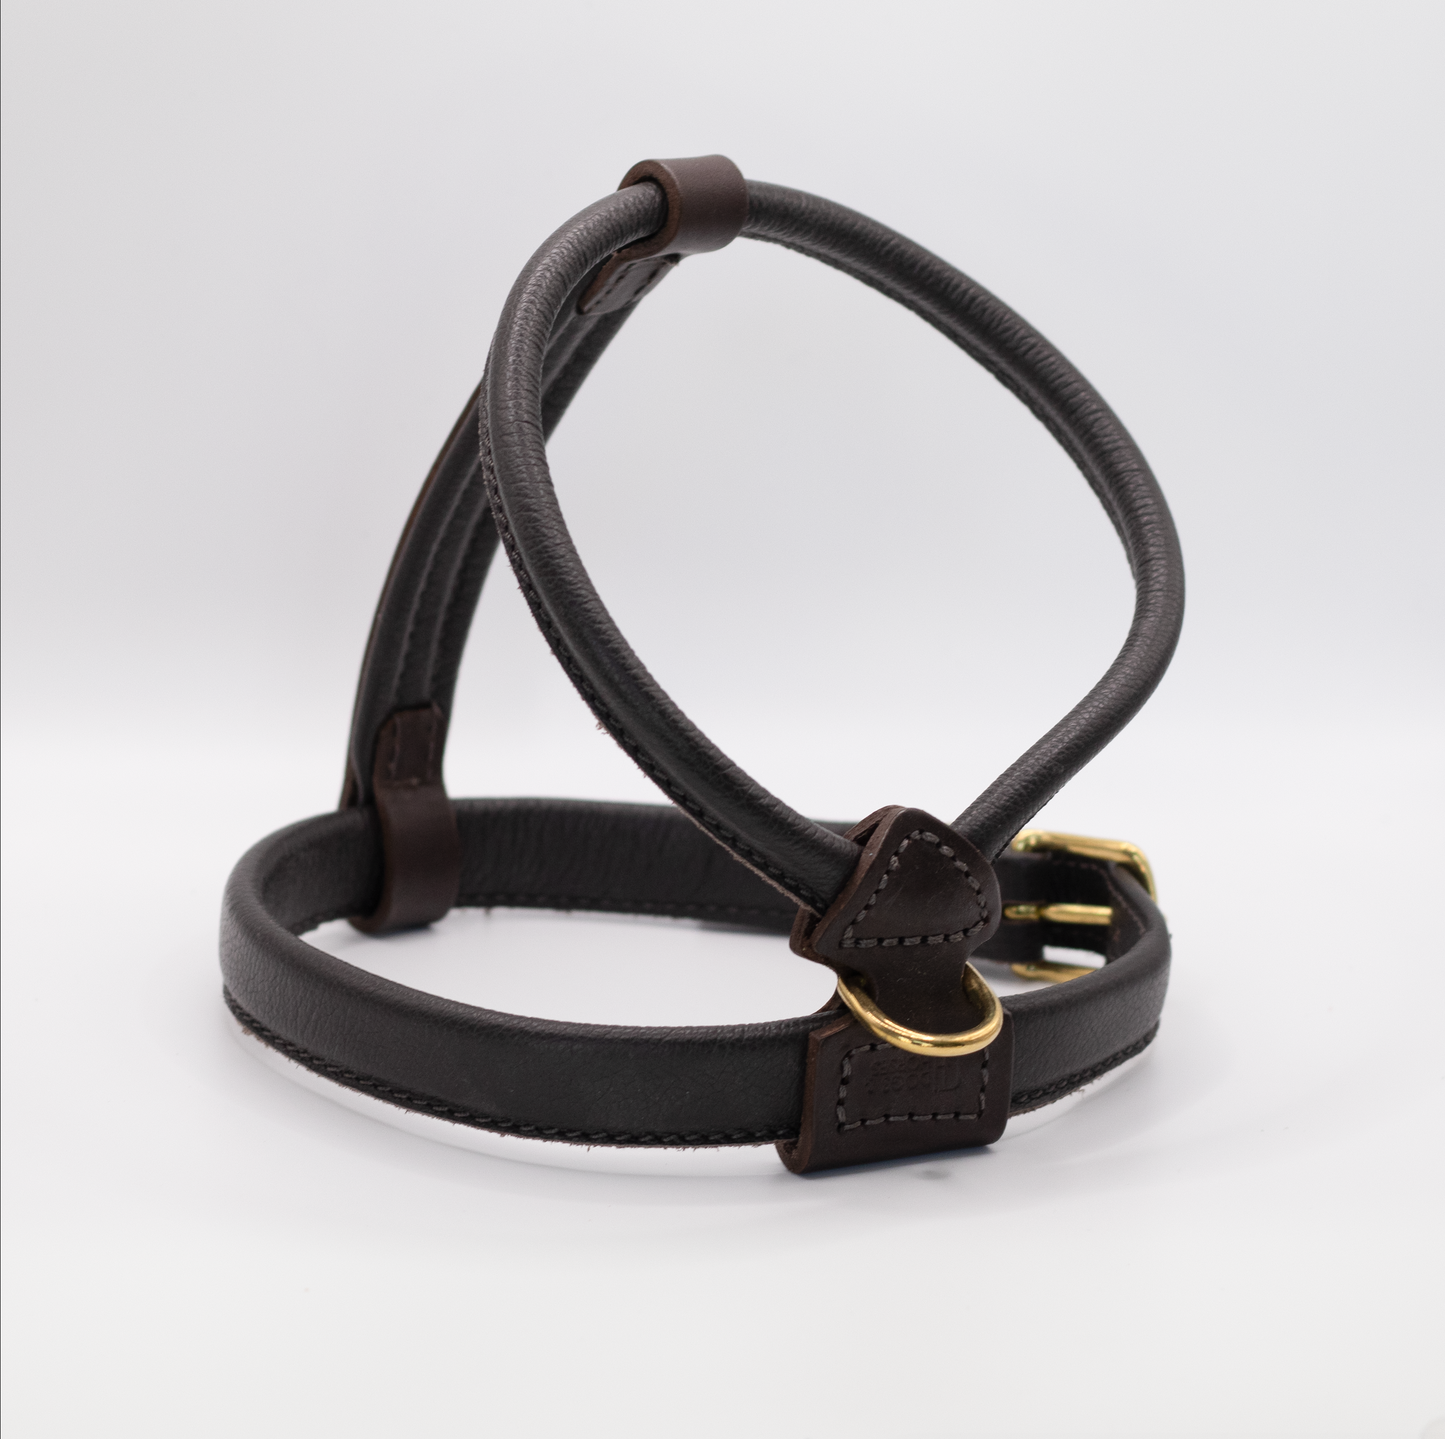 French Bulldog Leather Harness Brown